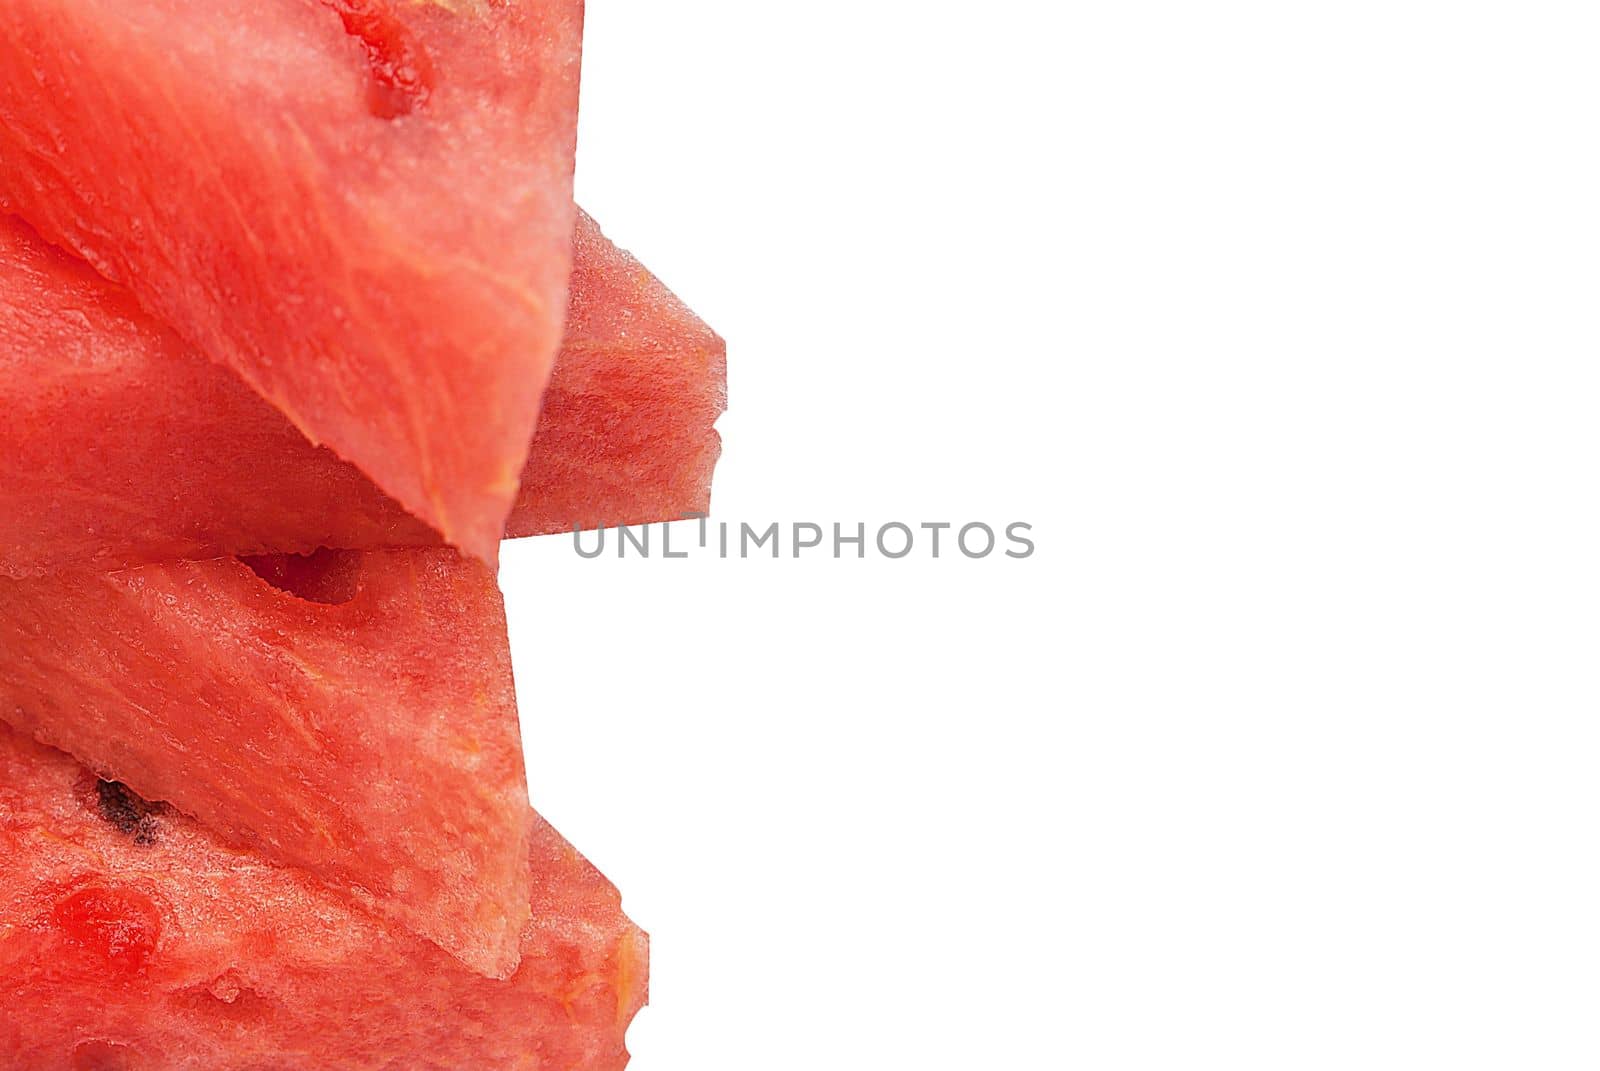 Slices of watermelon isolated on white background with space for text